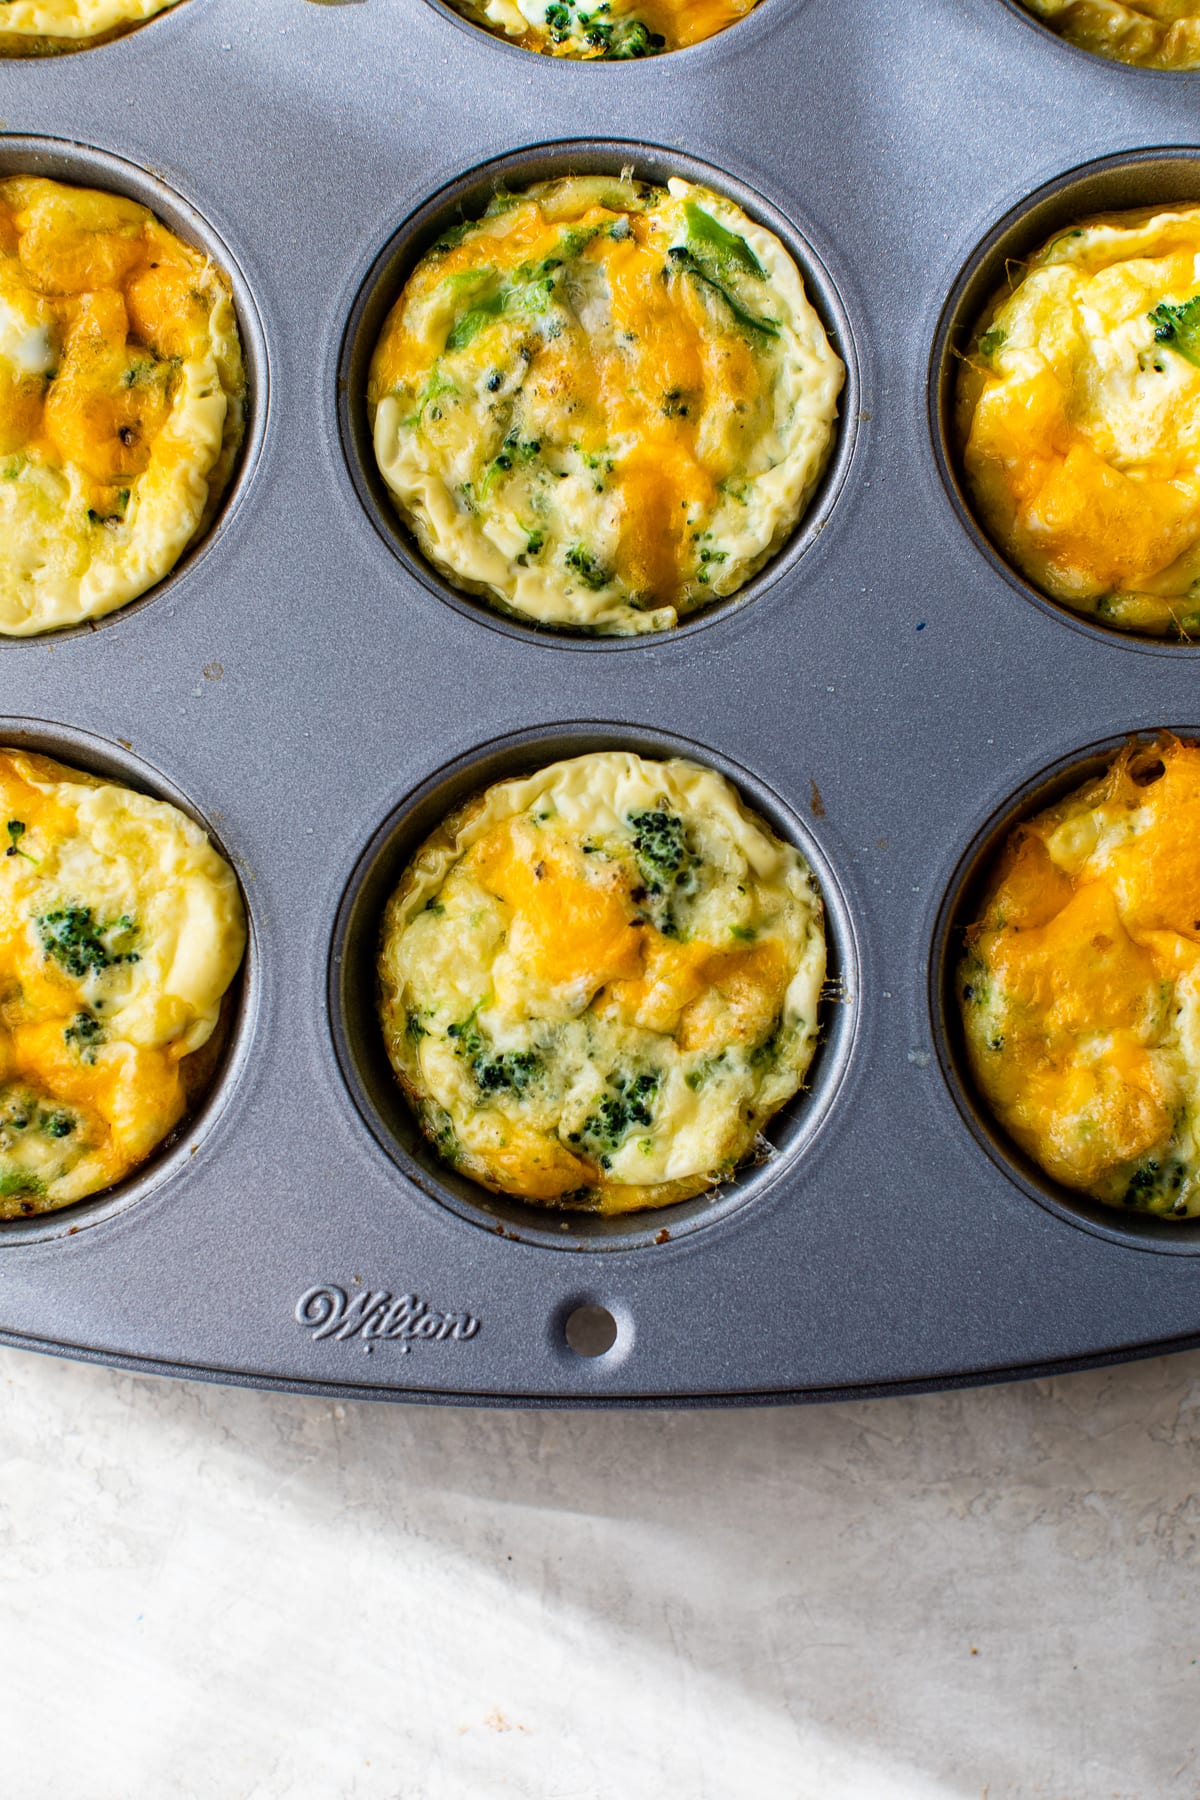 Broccoli and Cheese Eggs in Muffin Tin